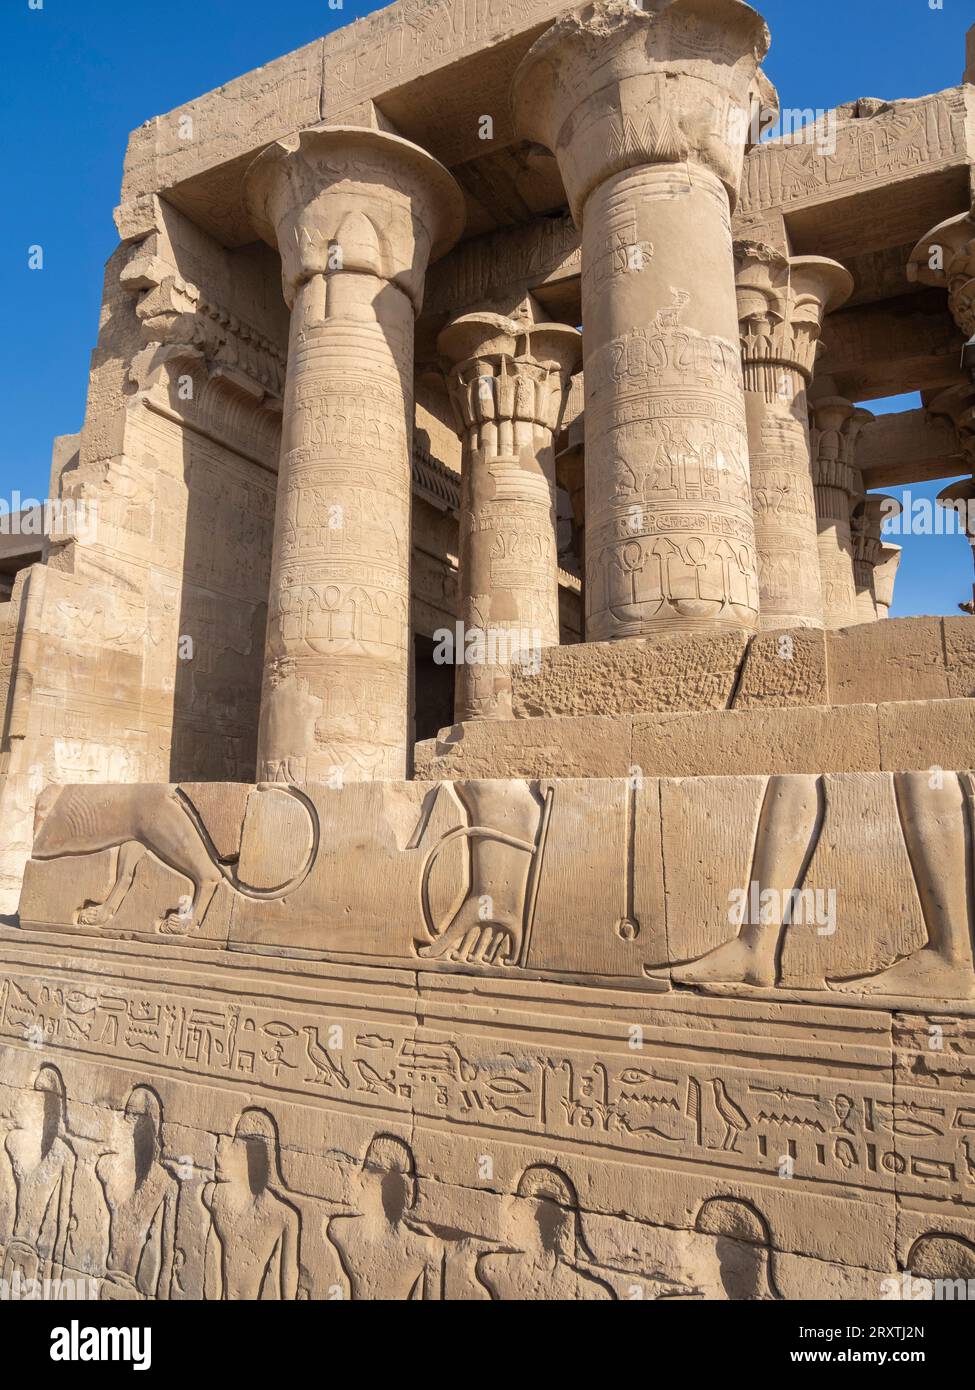 The Temple of Kom Ombo, constructed during the Ptolemaic dynasty, 180 BCE to 47 BCE, Kom Ombo, Egypt, North Africa, Africa Stock Photo